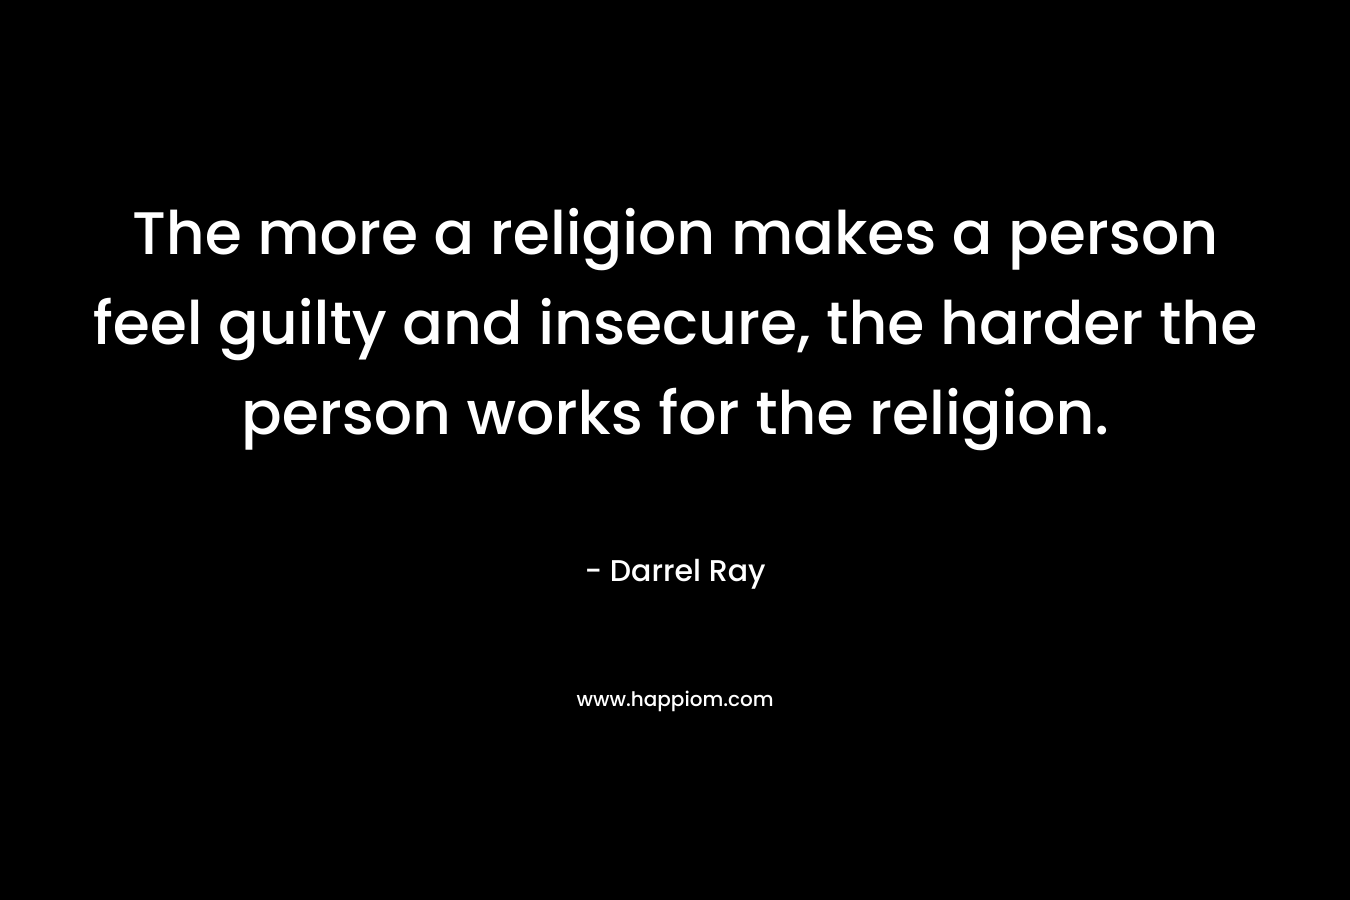 The more a religion makes a person feel guilty and insecure, the harder the person works for the religion.